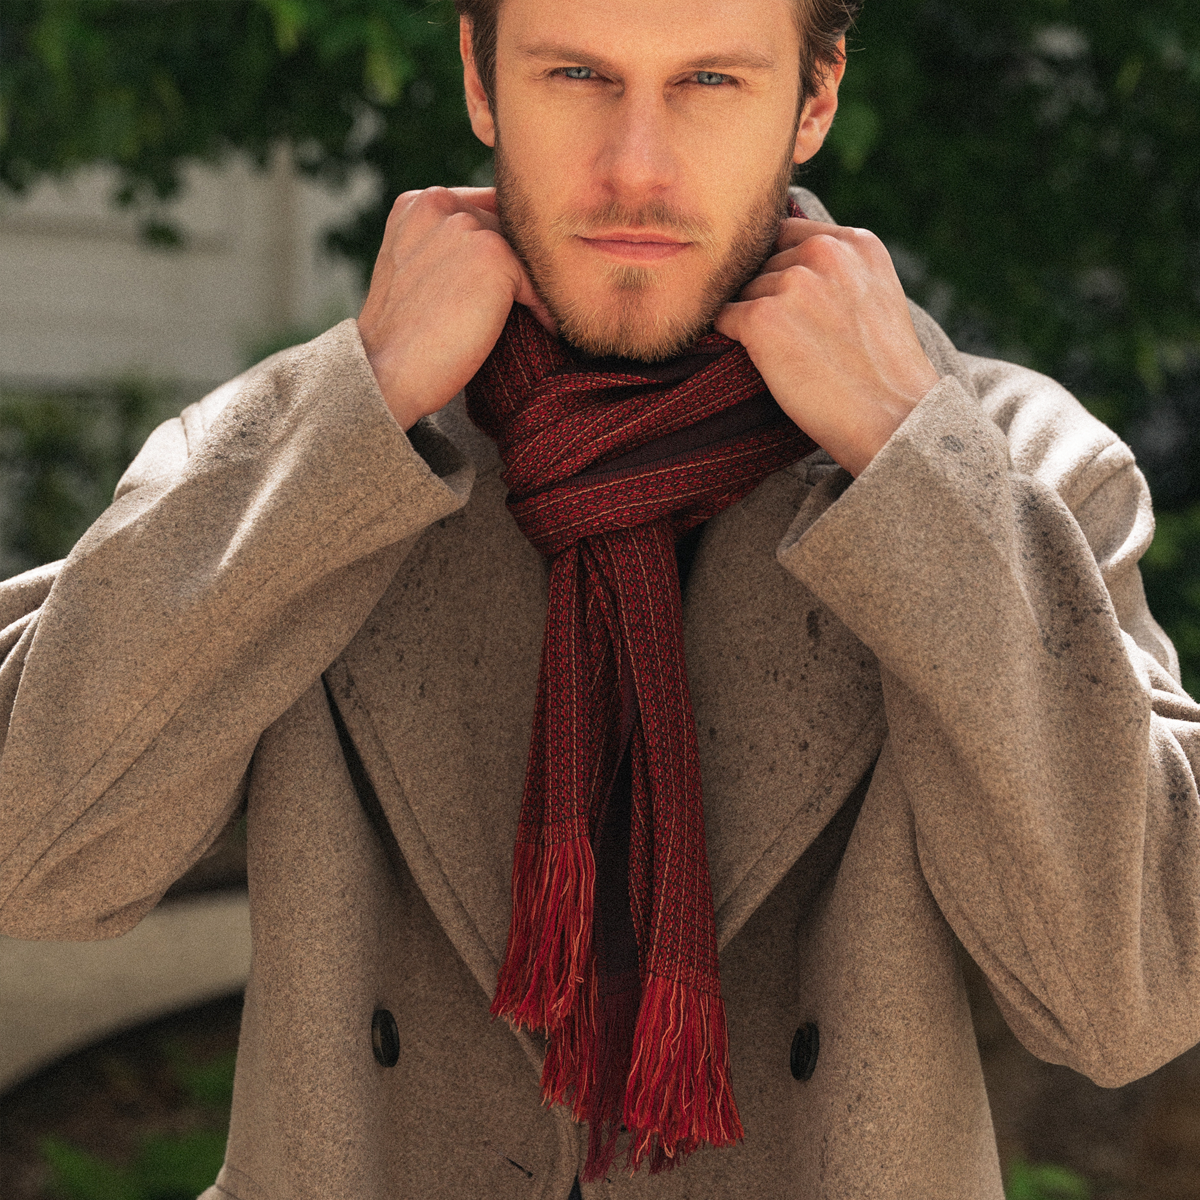 The Red Scarf — With Wool